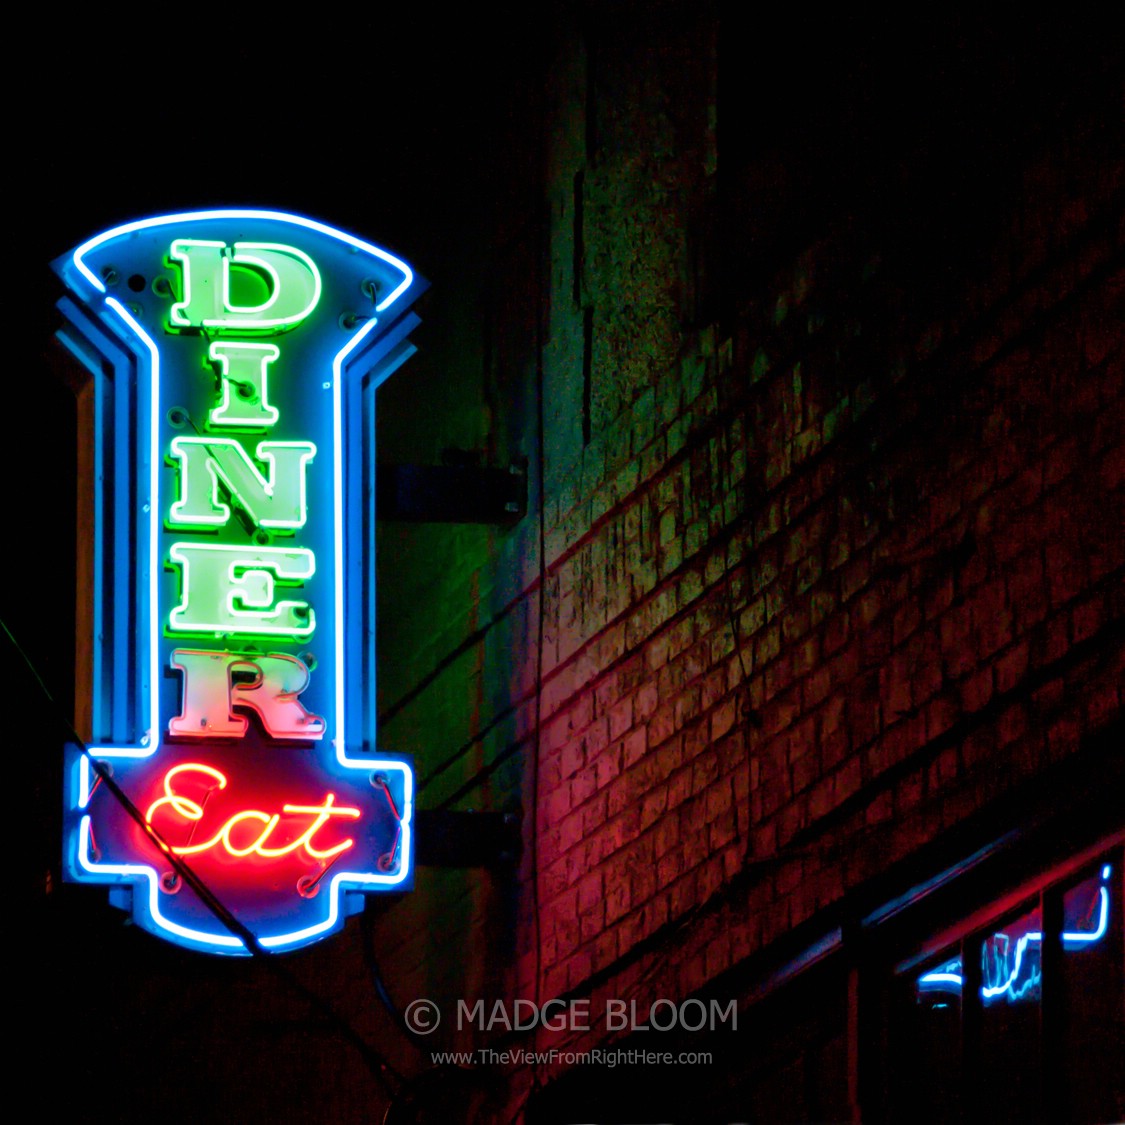 Square Knot Diner – Weekly Top Shot #83